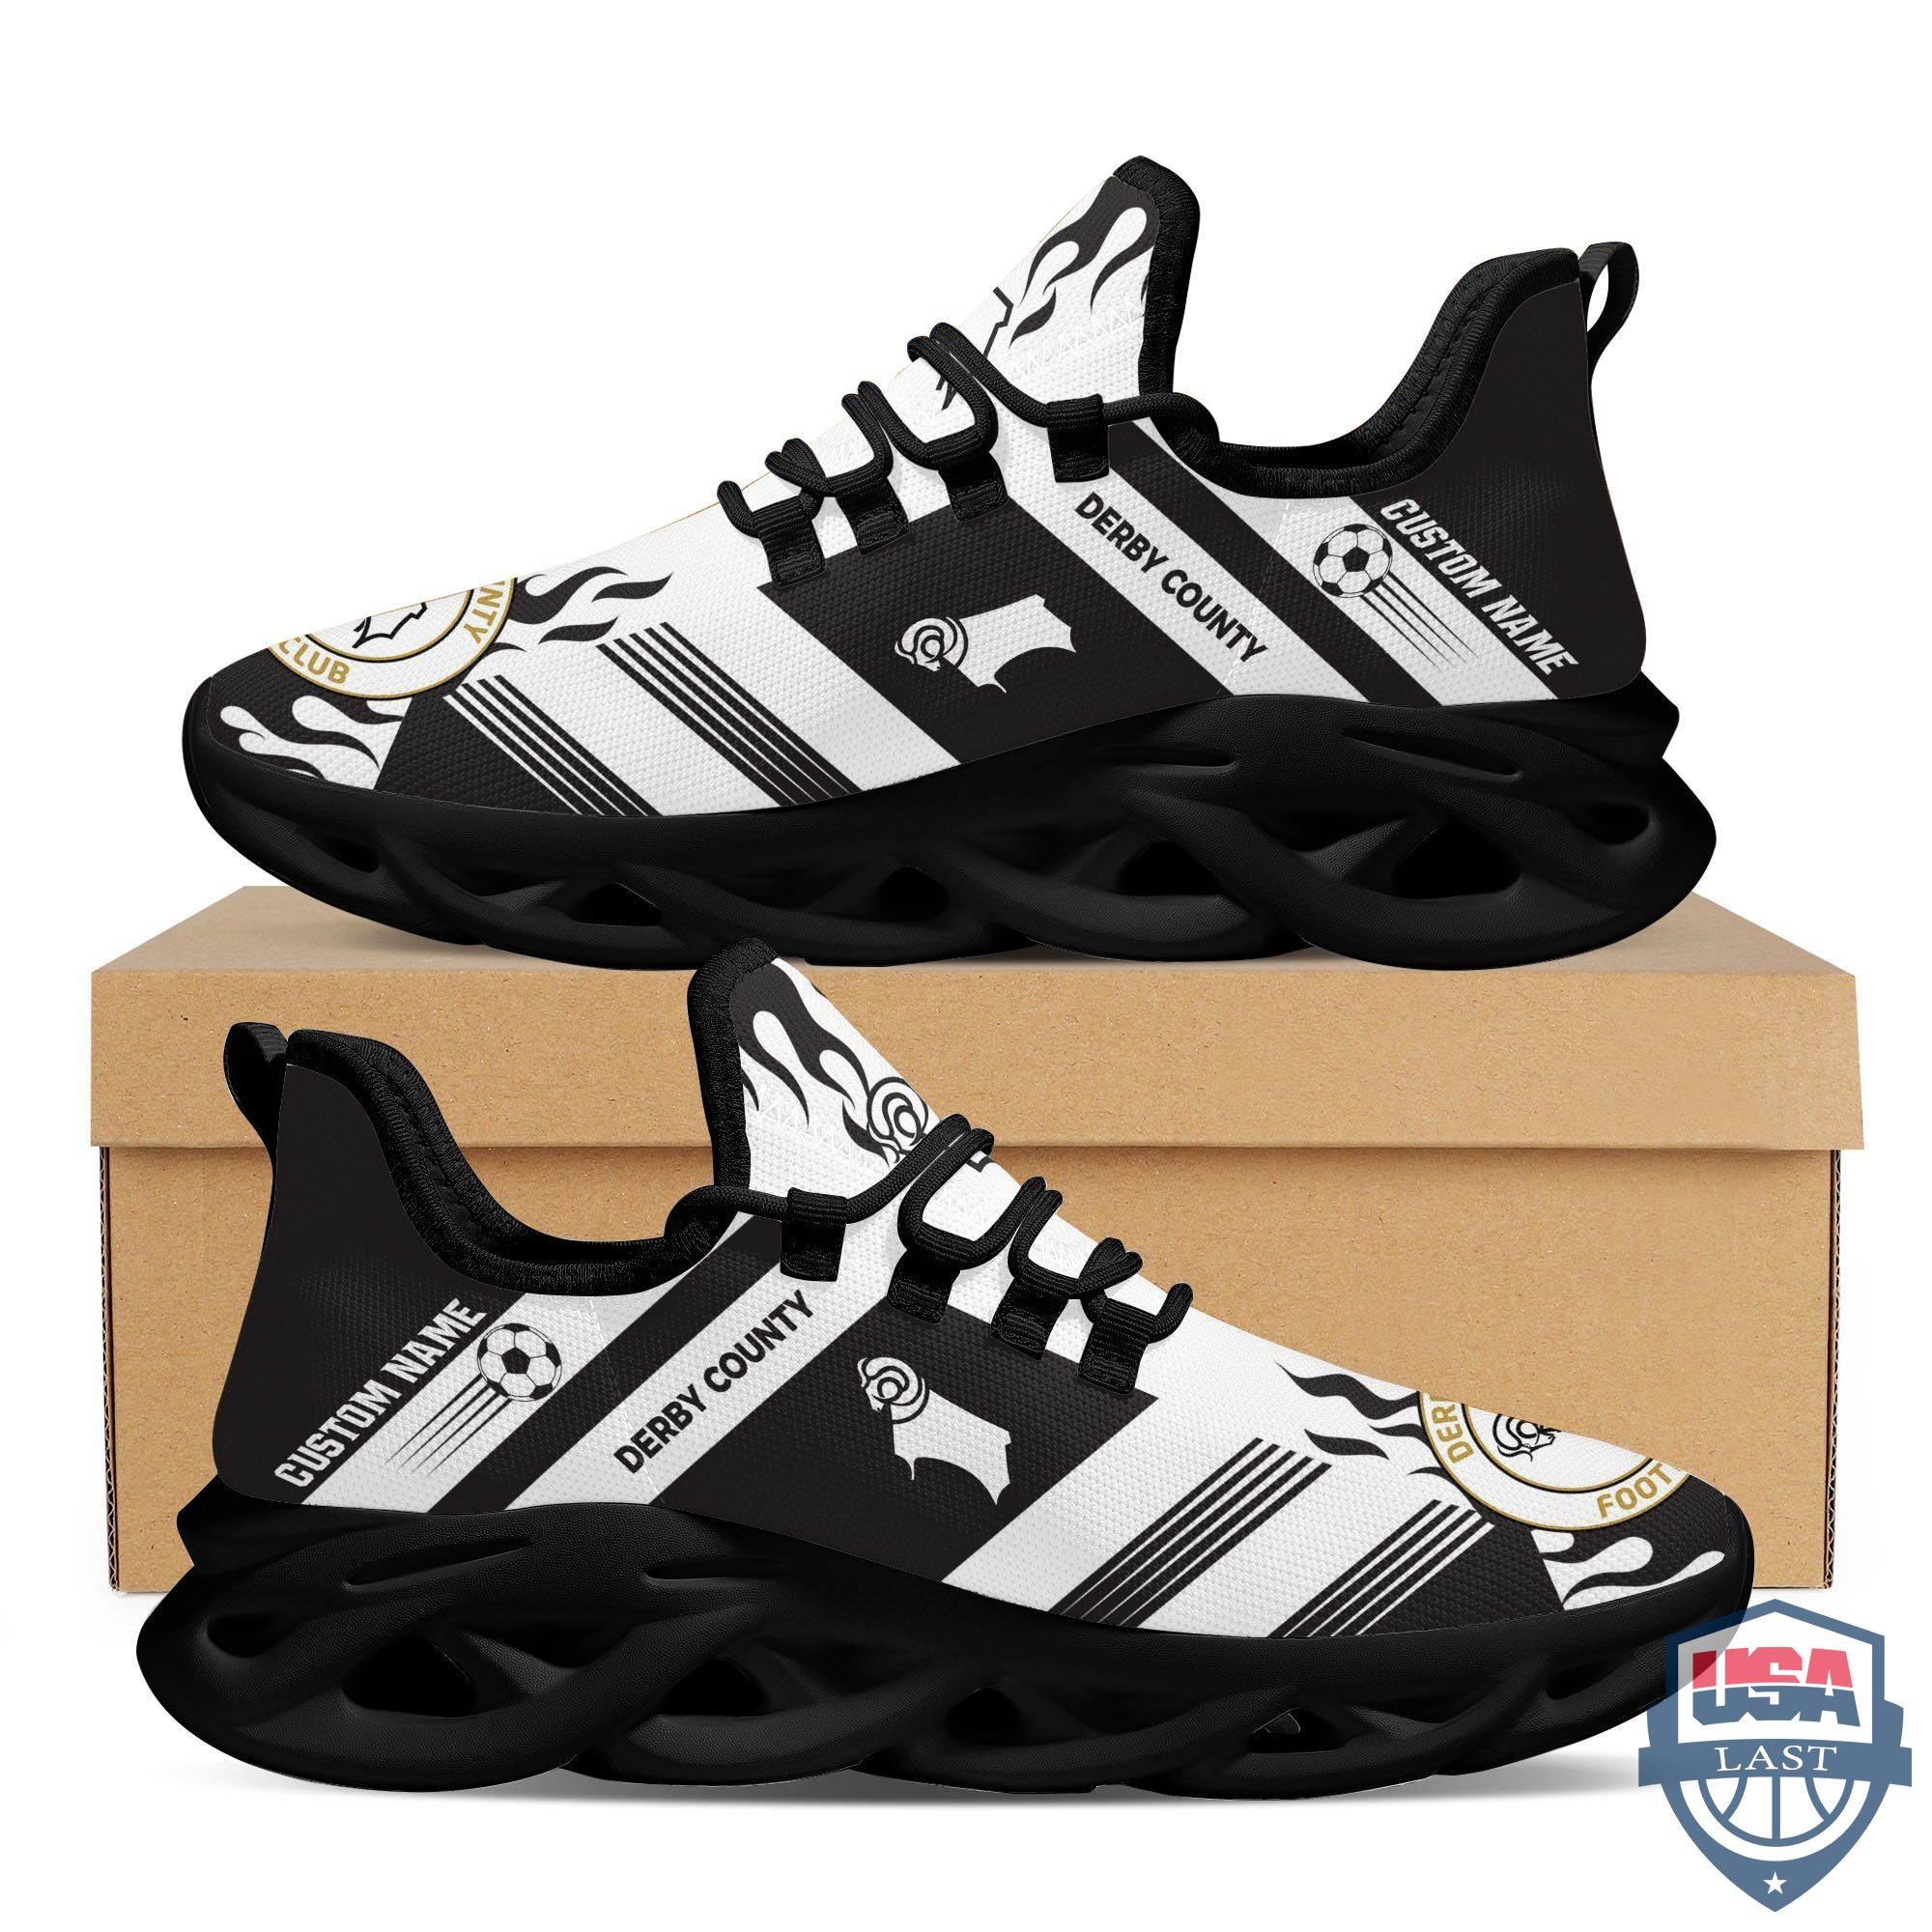 yHW3NoGJ-T140122-127xxxDerby-County-Custom-Name-Max-Soul-Sneakers-Running-Shoes.jpg